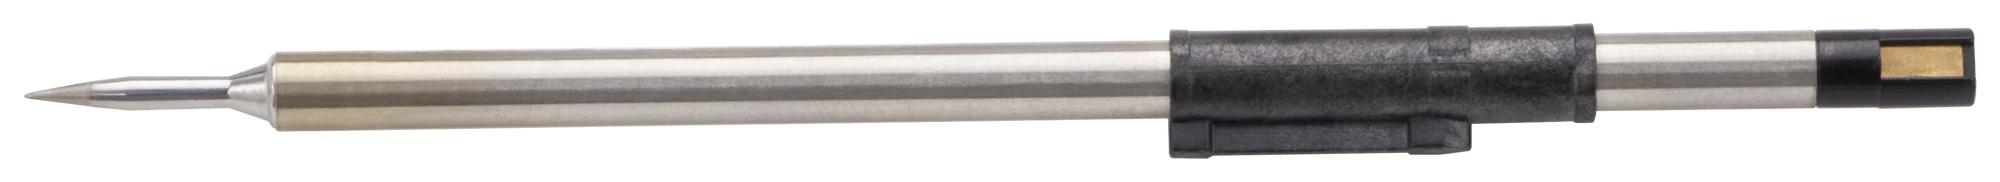 1124-0004-P1 TIP CARTRIDGE, CONICAL, SHARP, 1/64" PACE